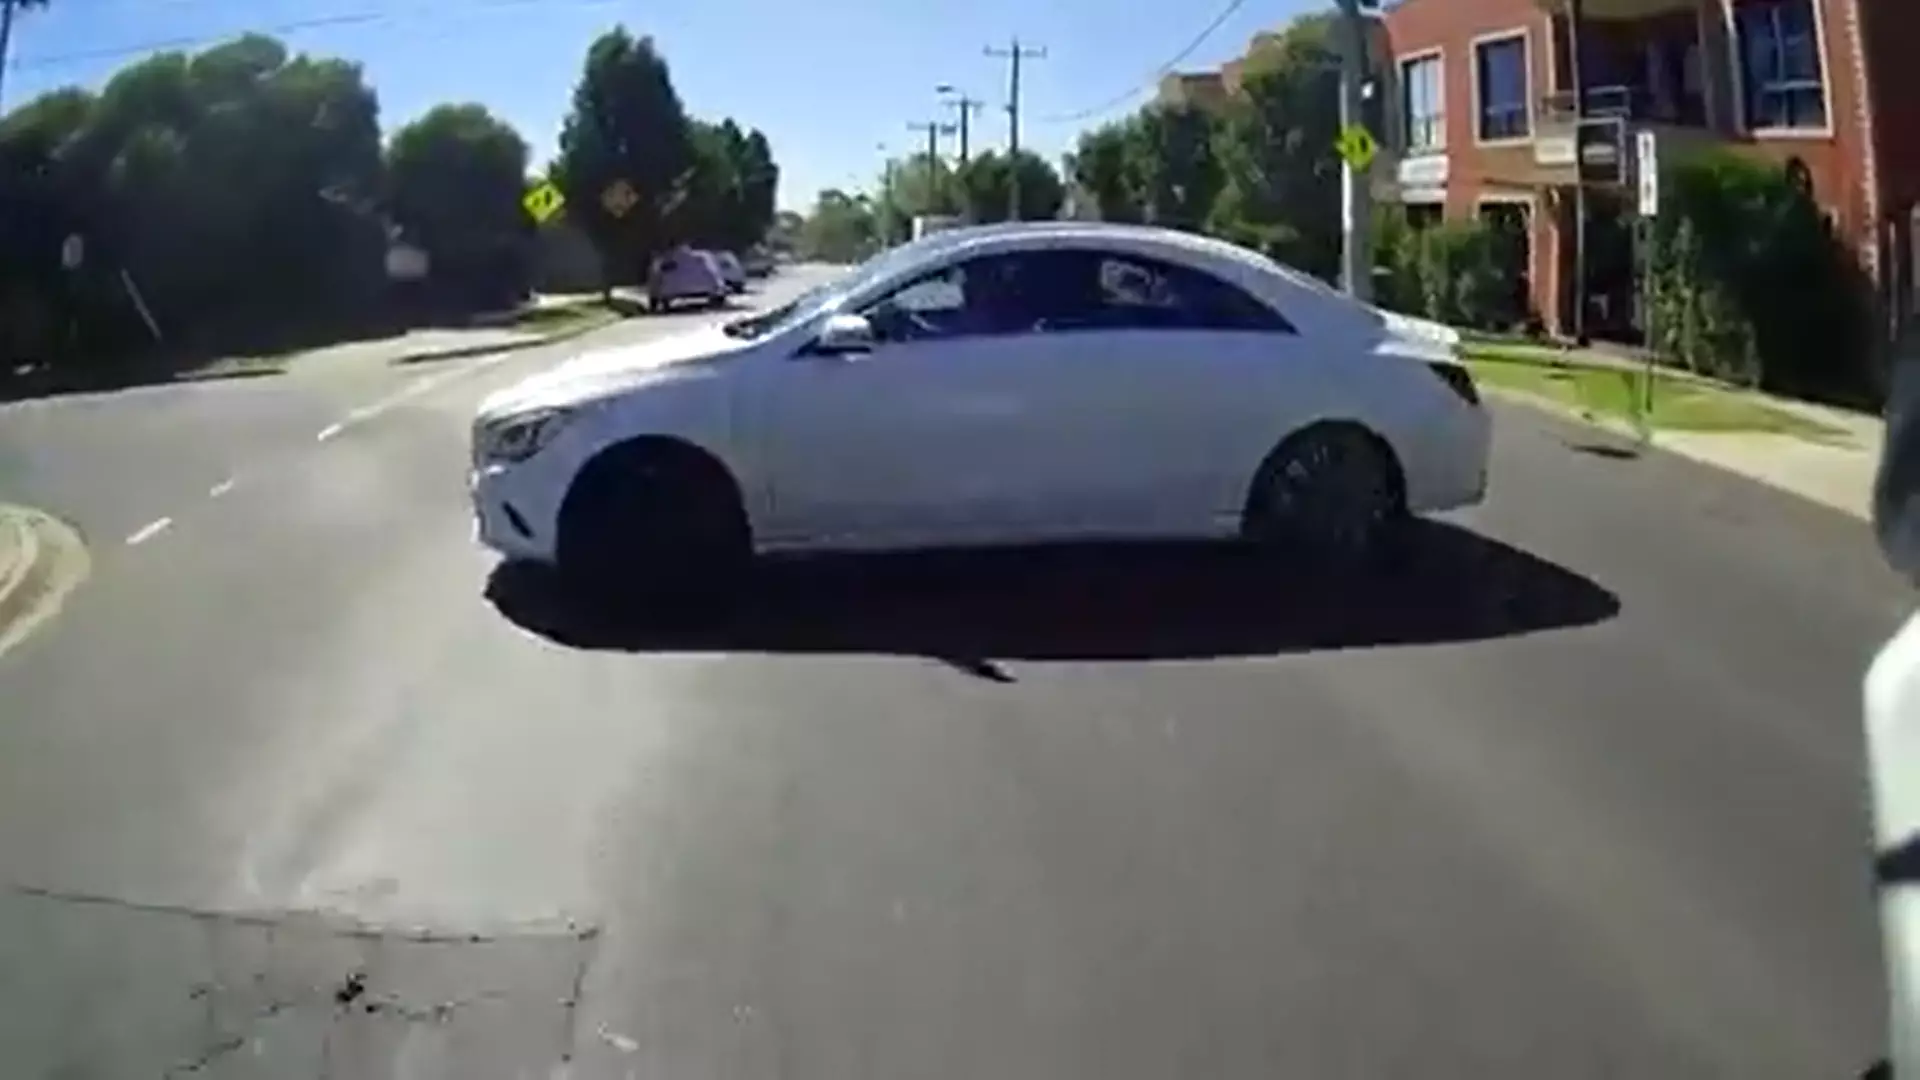 Opinion Divided Over Video Showing Motorbike Crashing Into Mercedes